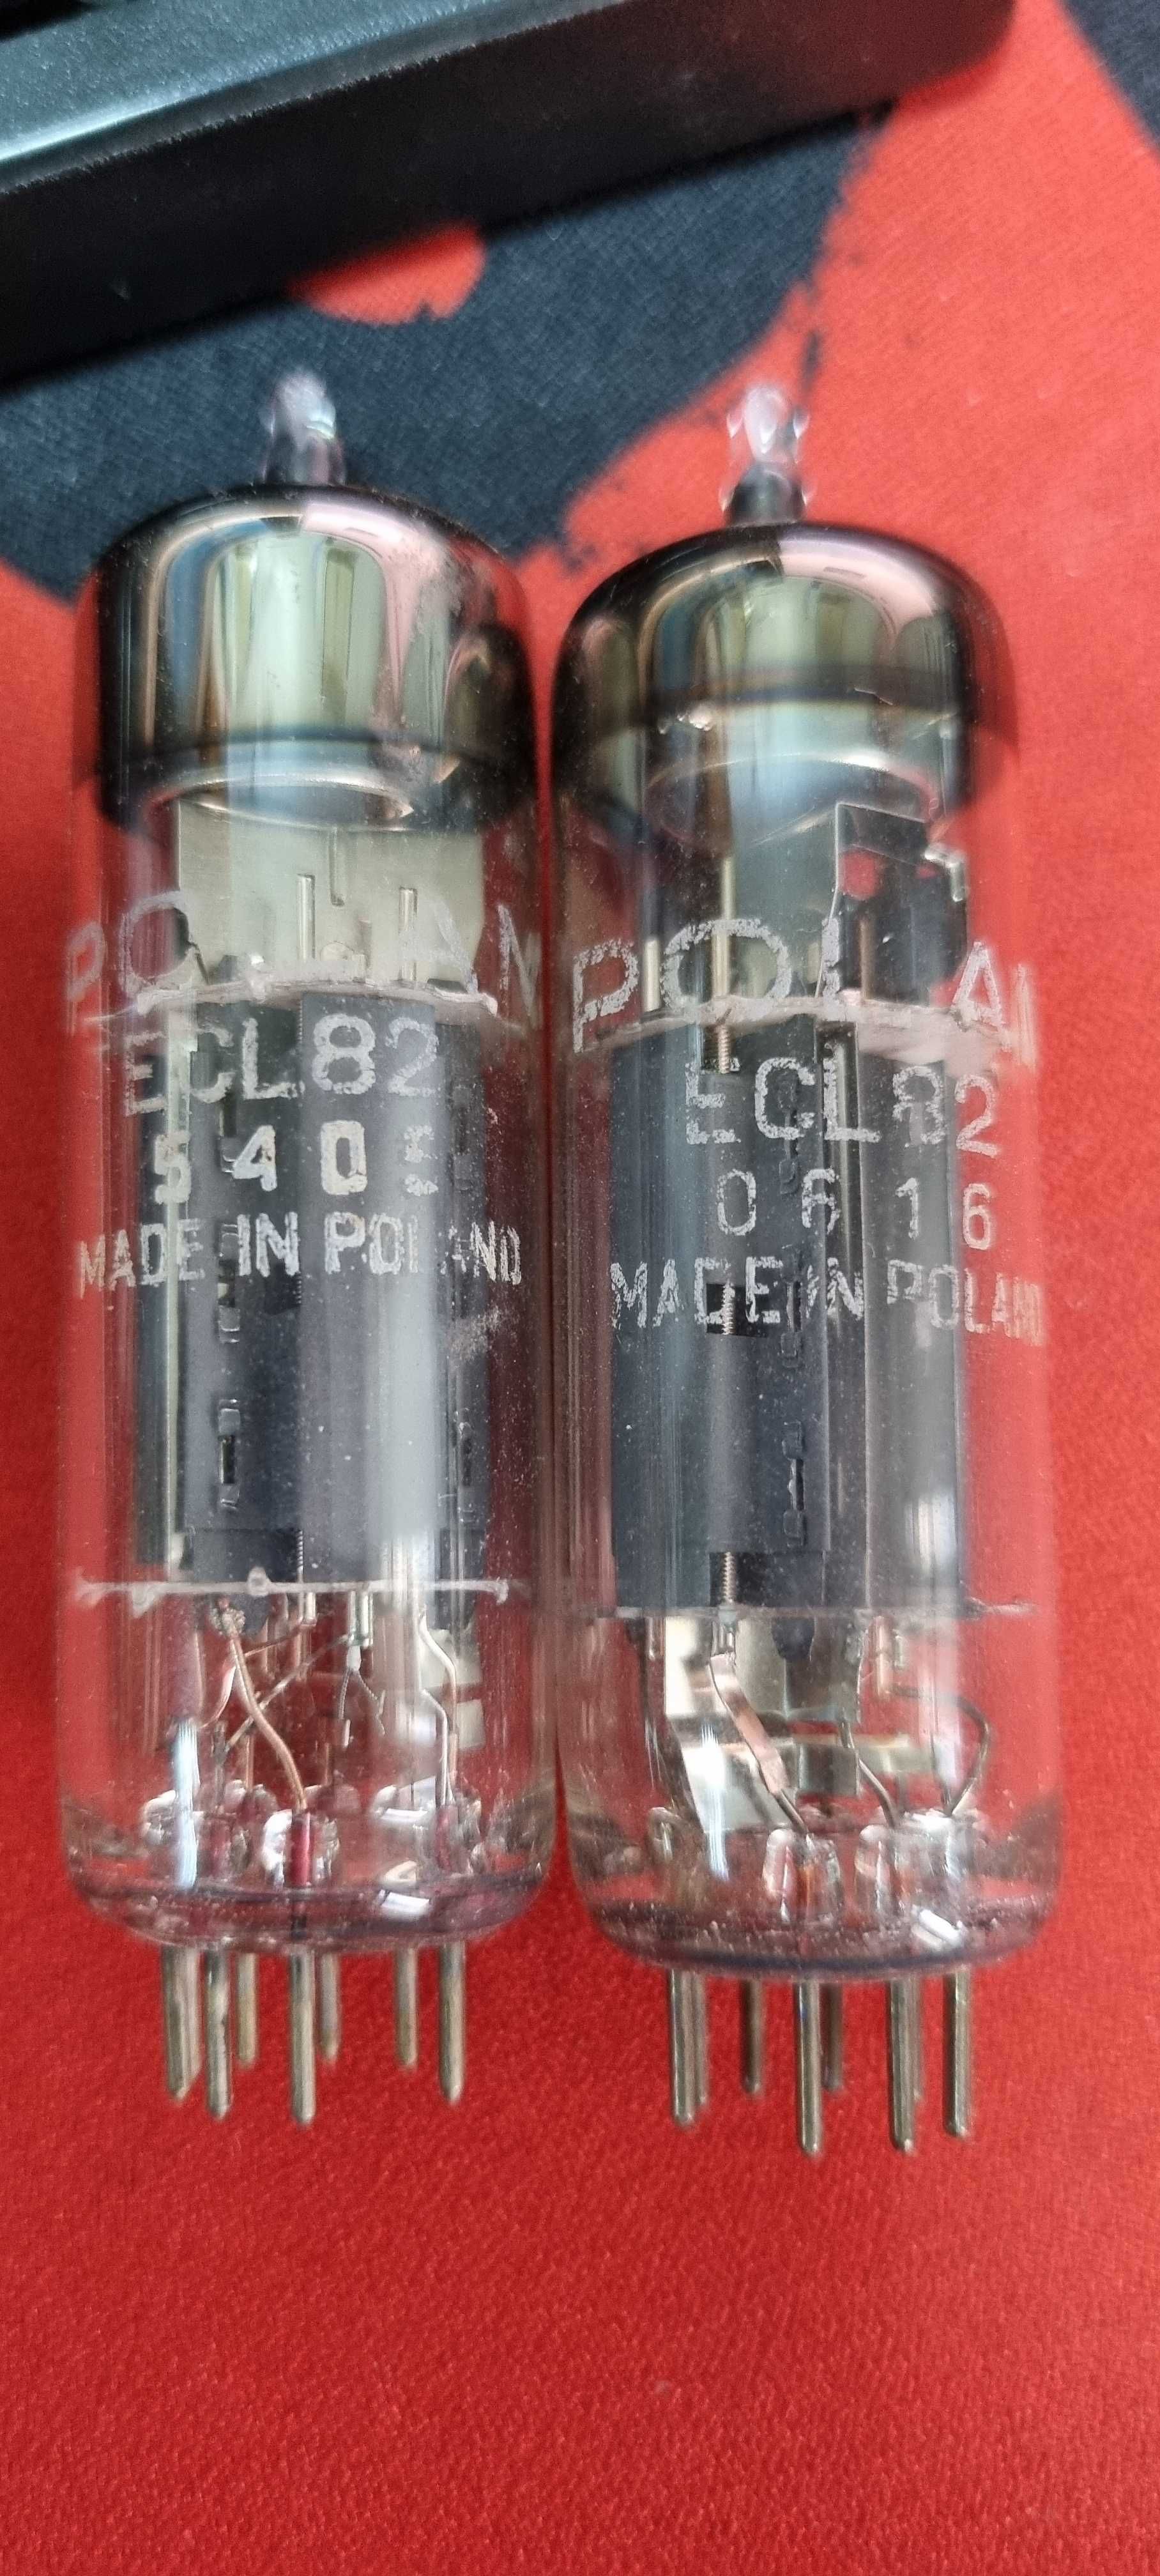 tub electronic , lampi ECL82, PCL86 PCL82